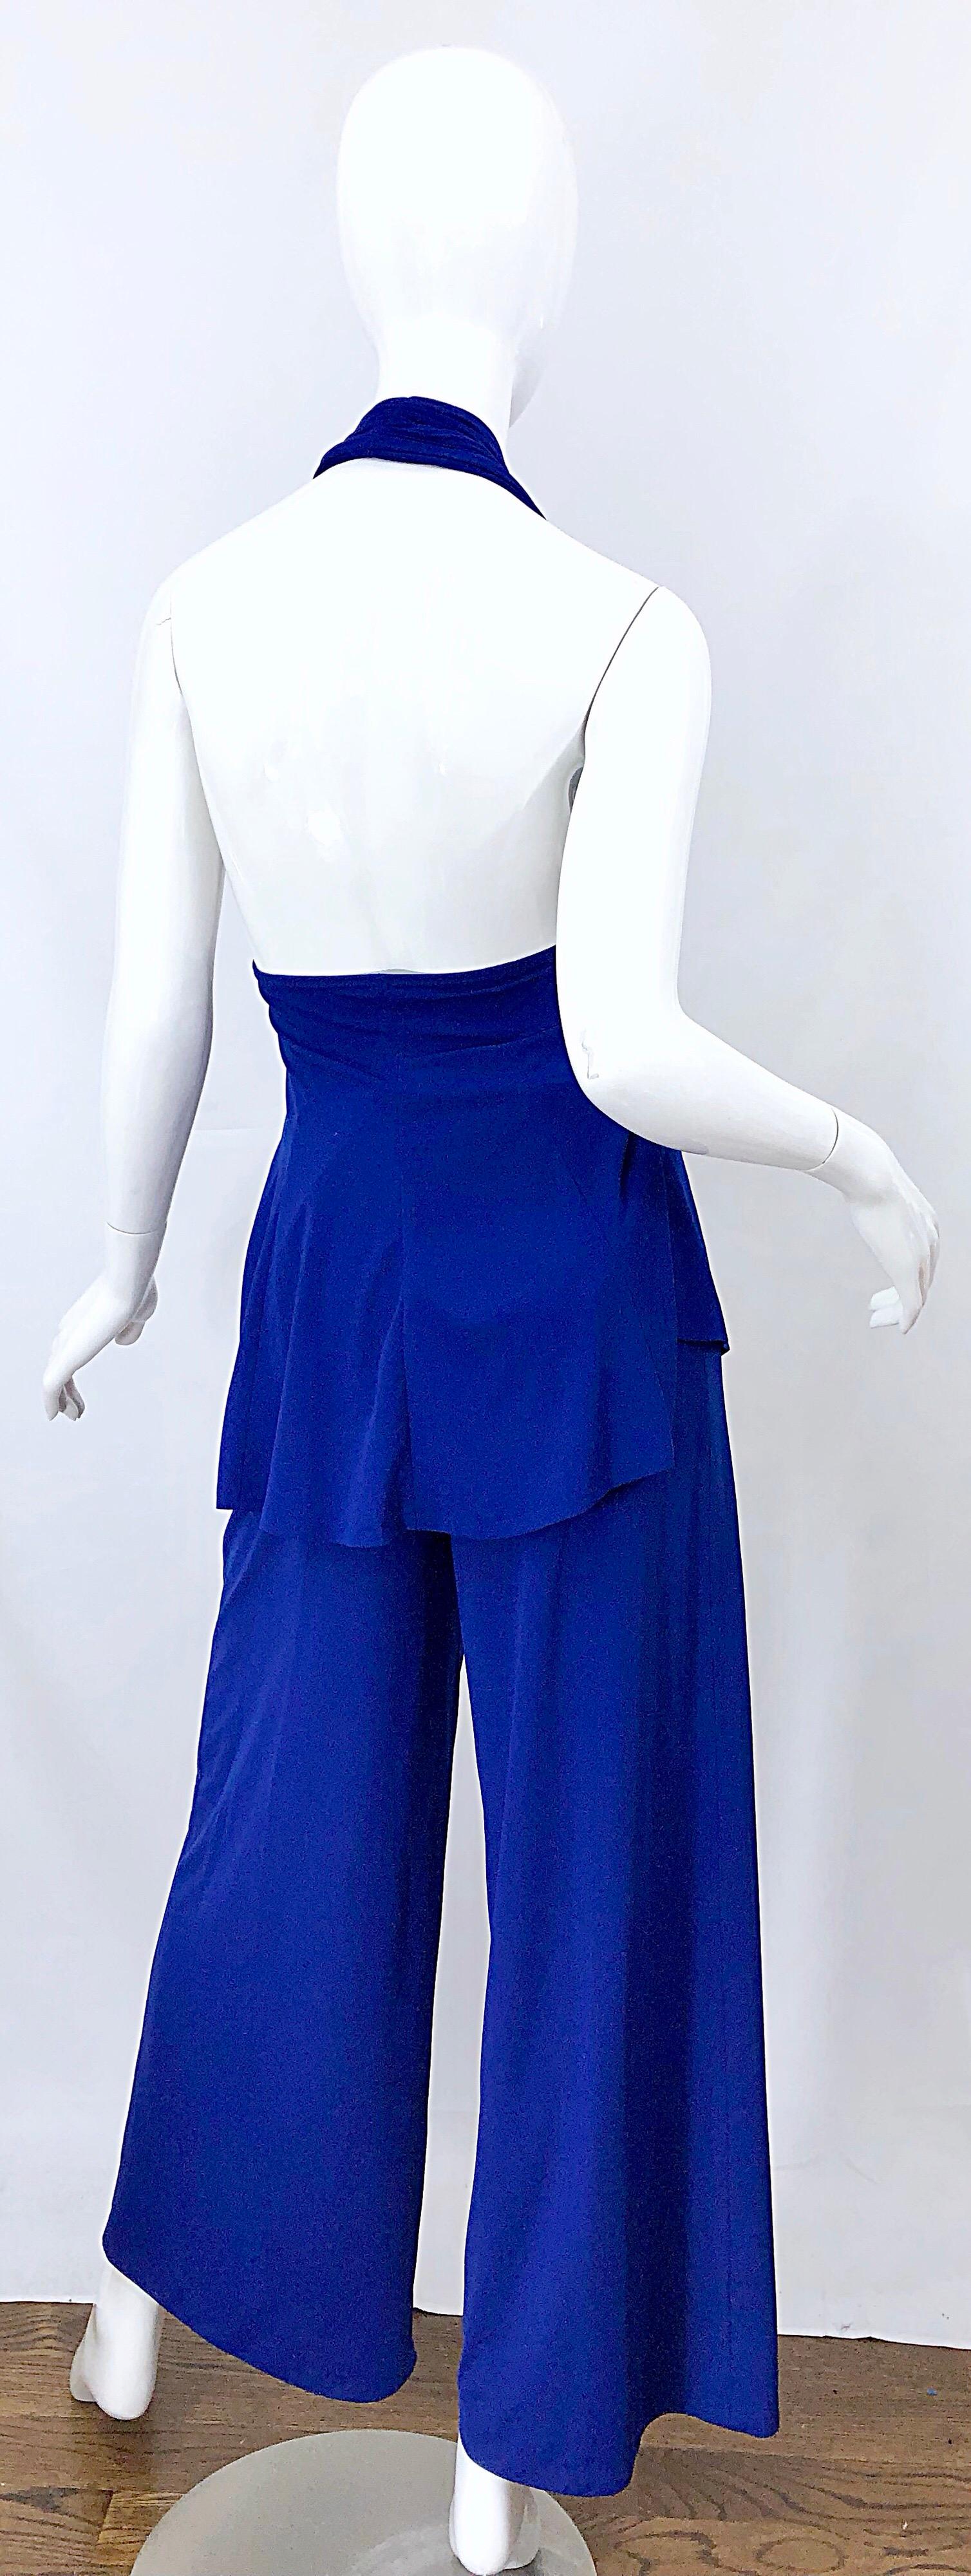 Vintage Norma Kamali OMO Late 1970s Royal Blue Swimsuit Bodysuit Wide Leg Pants In Excellent Condition For Sale In San Diego, CA